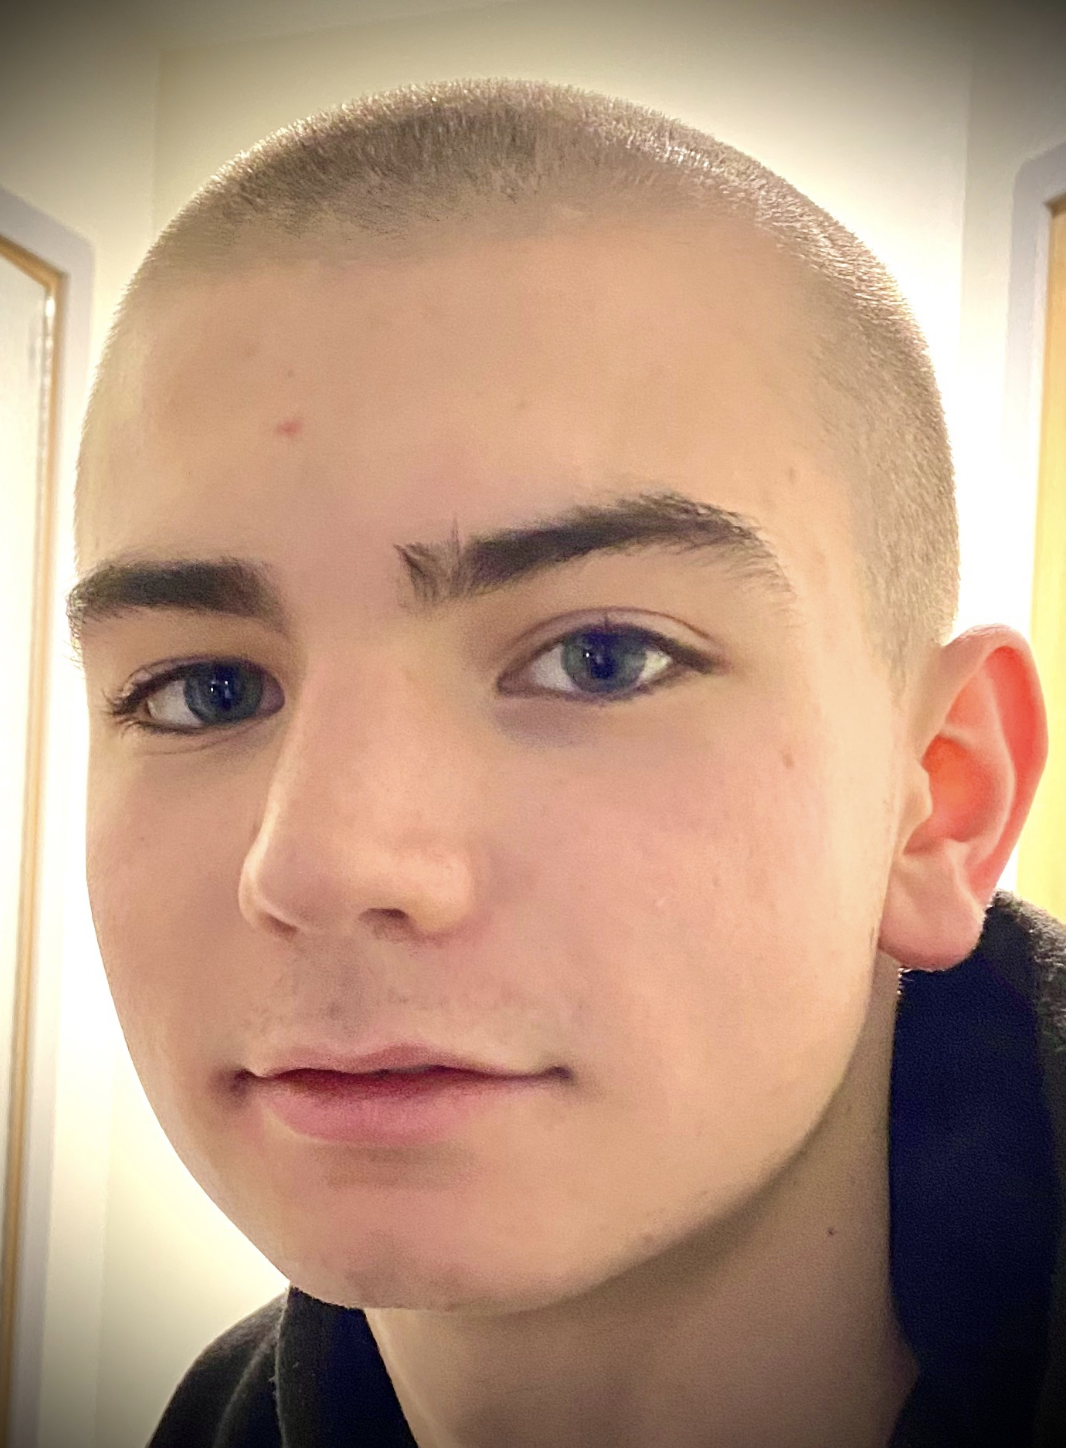 <p><span>On Jan. 7, 2022, "Nothing Compares 2 U" singer Sinéad O'Connor took to social media to tell her fans that son Shane, the third of her four children, was </span><a href="https://www.wonderwall.com/celebrity/stars-we-lost-in-2022-544600.gallery?photoId=544586">dead at 17 </a><span>following earlier posts revealing he was missing. "My beautiful son, Nevi'im Nesta Ali Shane O'Connor, the very light of my life, decided to end his earthly struggle today and is now with God," tweeted the music star, who had Shane with ex Donal Lunny, an Irish folk musician. "May he rest in peace and may no one follow his example. My baby. I love you so much. Please be at peace." </span></p><p>In another post, she tweeted a Bob Marley song that she dedicated to her son, writing, "This is for my Shaney. The light of my life. The lamp of my soul. My blue-eye baby. You will always be my light. We will always be together. No boundary can separate us." She also revealed Shane had been in the care of a state hospital at the time of his disappearance and accused the facility of allowing her son to get "out of their grasp." She later added, "May God forgive the Irish State for I never will."</p><p>Sadly, 18 months after Shane's death, <a href="https://www.wonderwall.com/celebrity/former-eight-is-enough-child-actor-more-stars-we-lost-in-2023-688482.gallery">Sinead, too, passed away</a>, The Irish Times announced on July 26, 2023. The "Nothing Compares 2 U" singer -- who was found unresponsive in a London home, police said in a statement, adding that "the death is not being treated as suspicious" -- was 56. In one of her final tweets, which she posted on July 17, 2023, Sinead shared her ongoing grief. "#lostmy17yrOldSonToSuicidein2022. Been living as undead night creature since. He was the love of my life, the lamp of my soul. We were one soul in two halves. He was the only person who ever loved me unconditionally. I am lost in the bardo without him," Sinead wrote.</p>